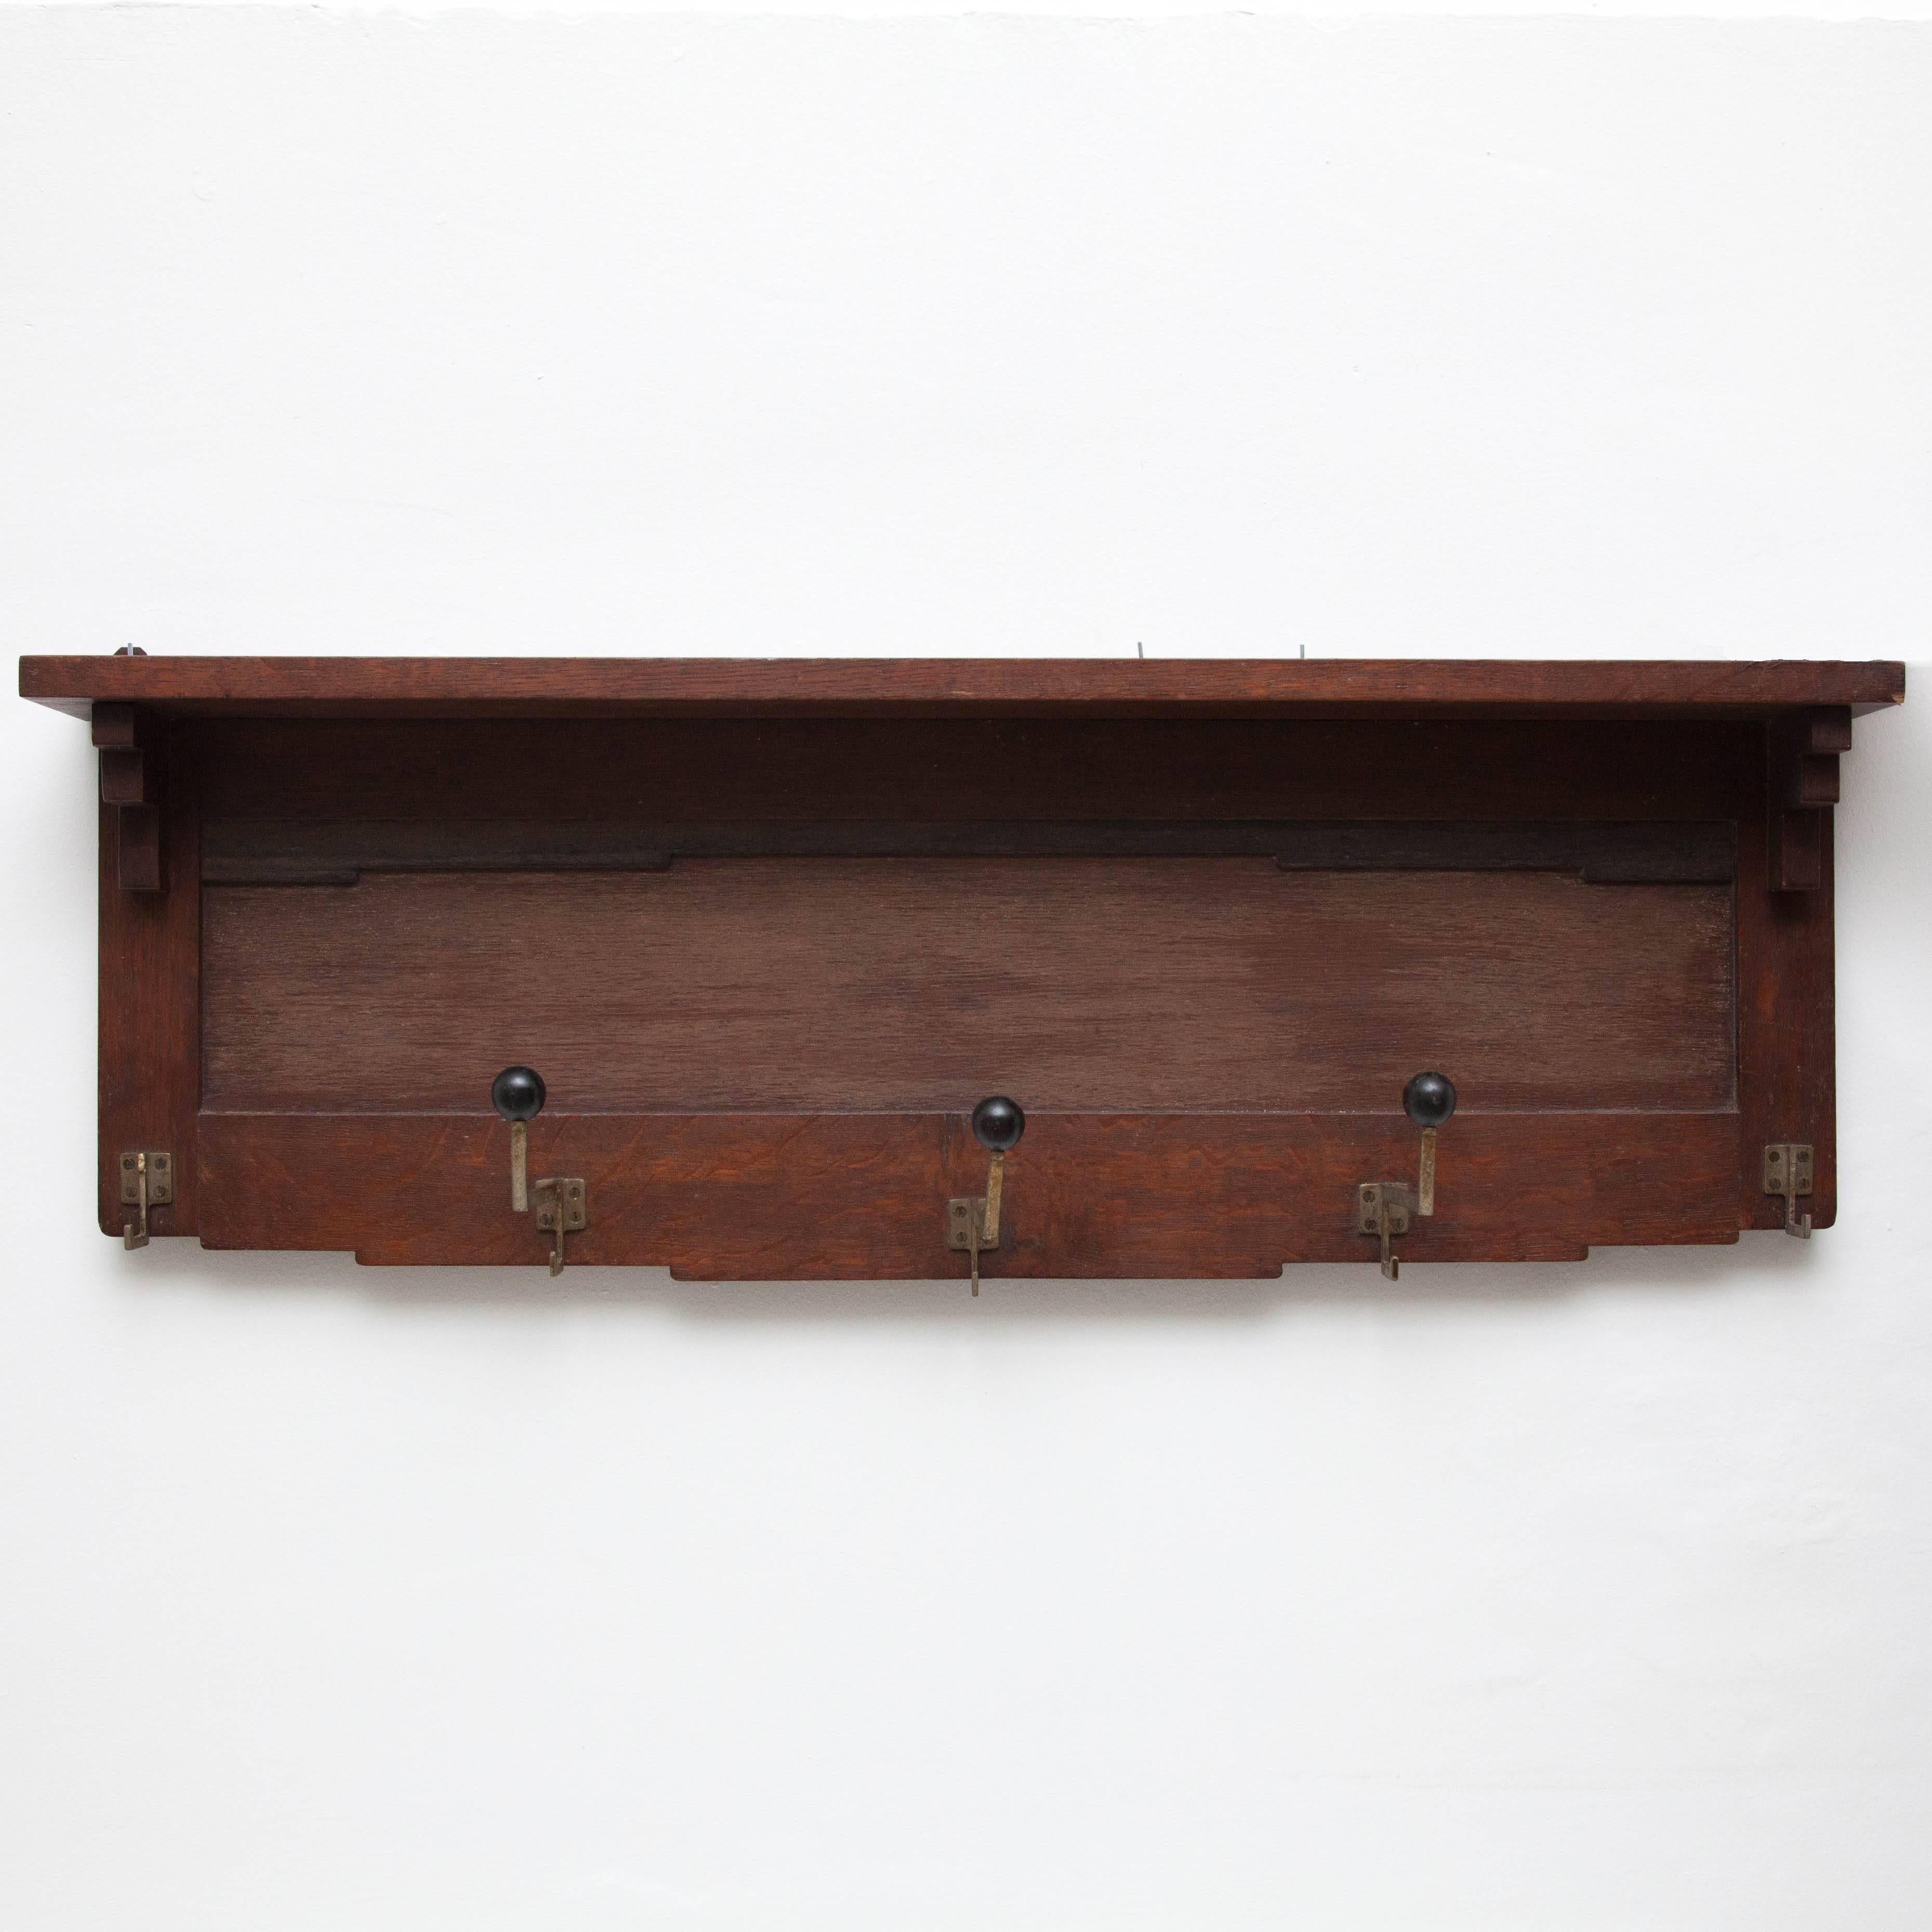 Add a touch of vintage charm and functionality to your entryway with this Amsterdam School style coat rack. Crafted circa 1940 and manufactured in Holland, this piece showcases the rationalist design principles prominent during that era.

Made of